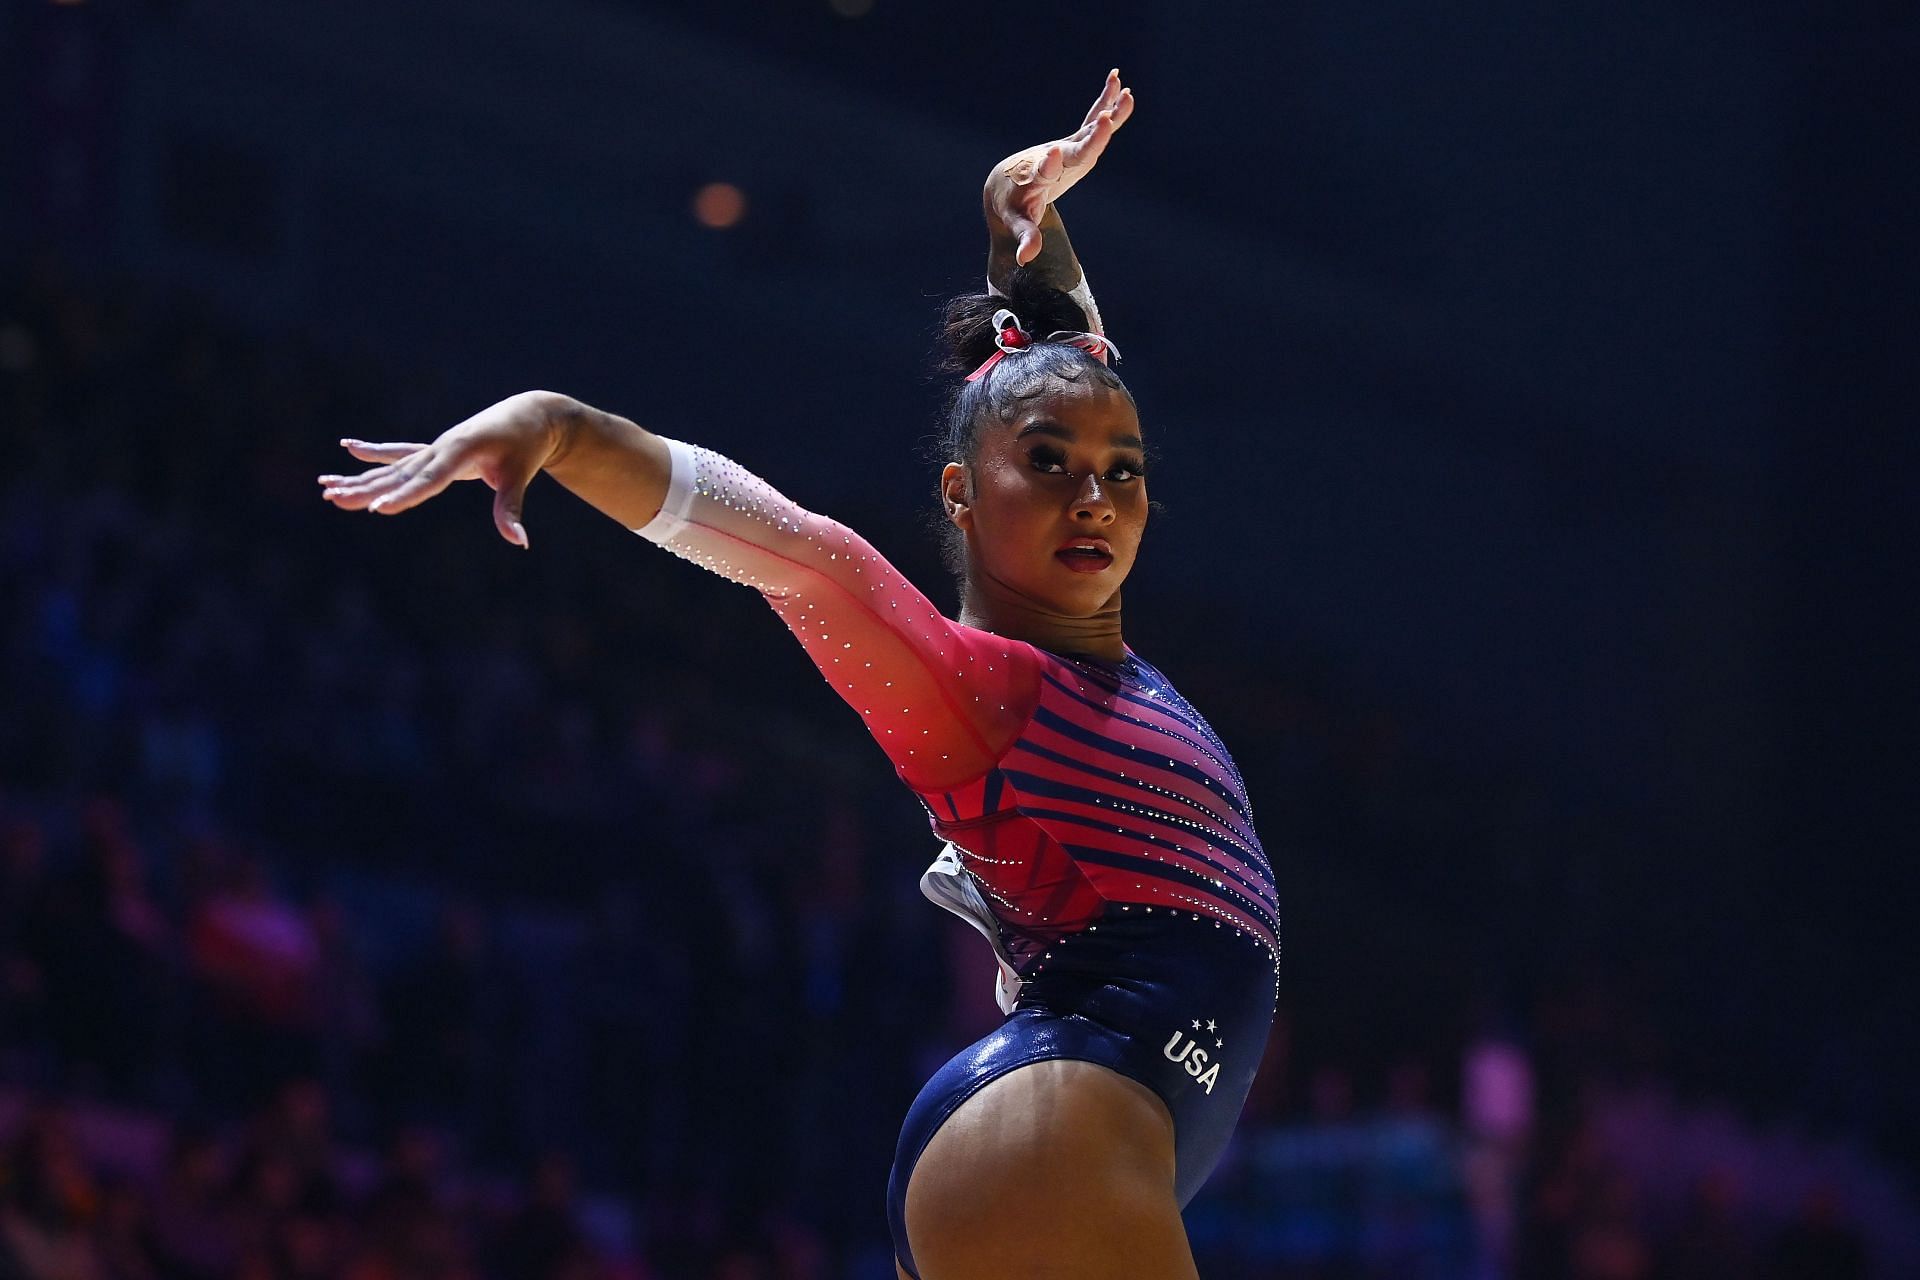 Chiles performs at the 2022 Gymnastics World Championships 